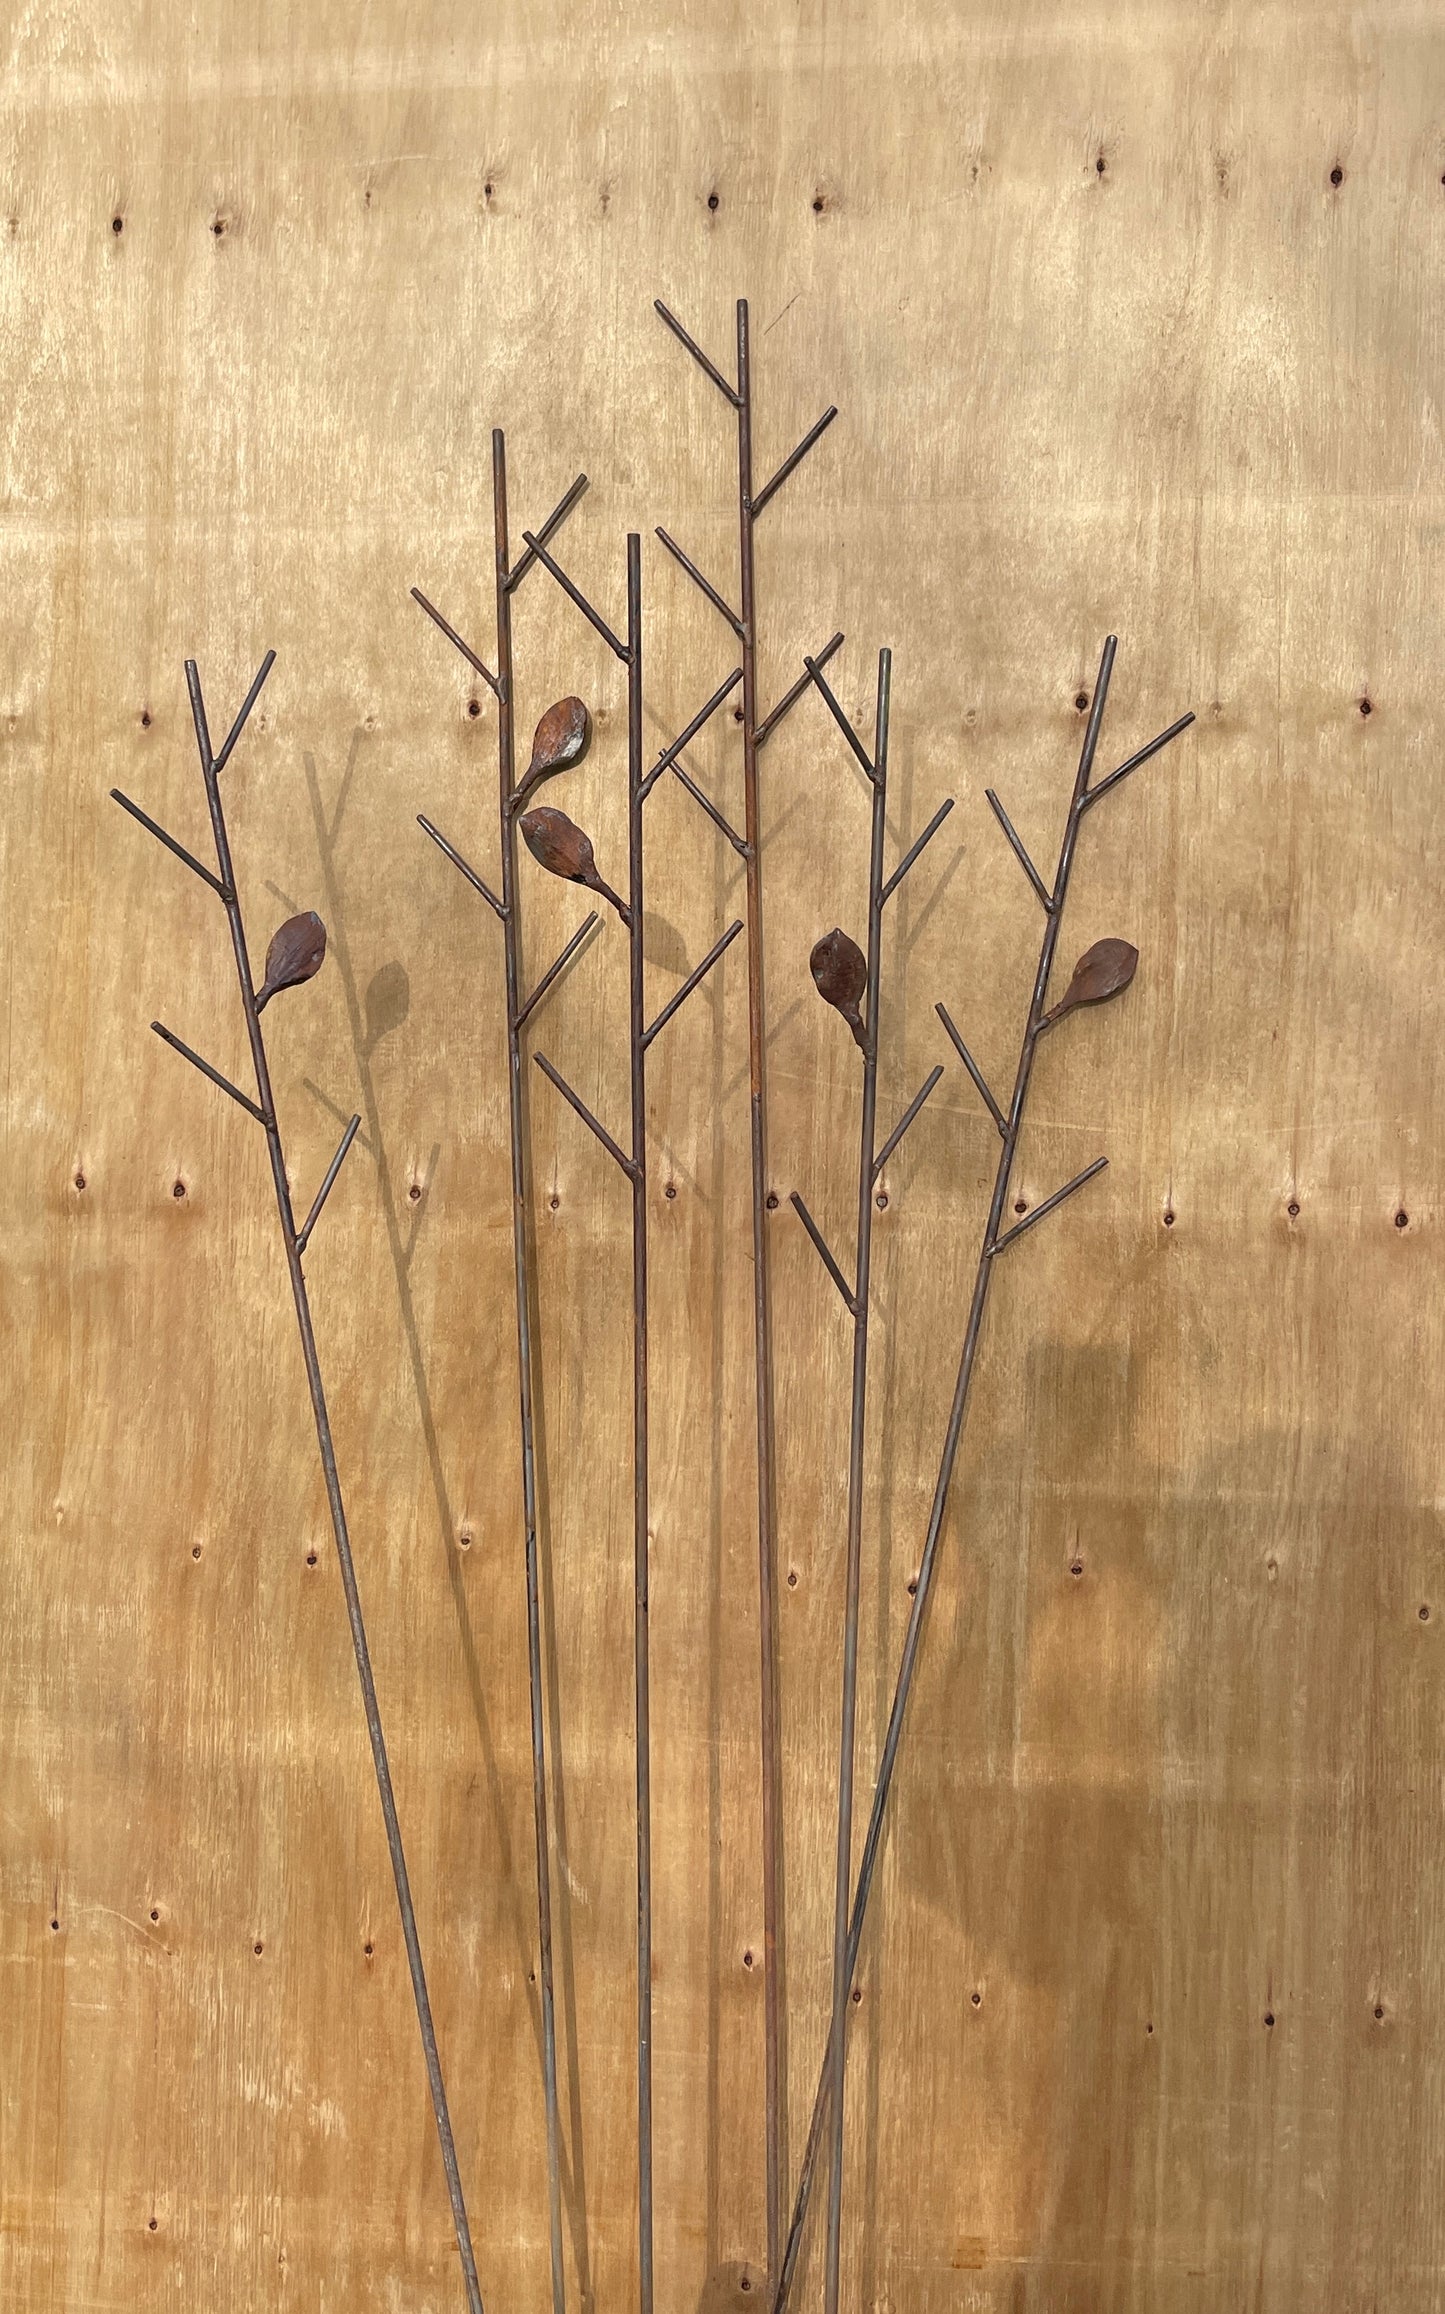 Artsy plant stakes - branches